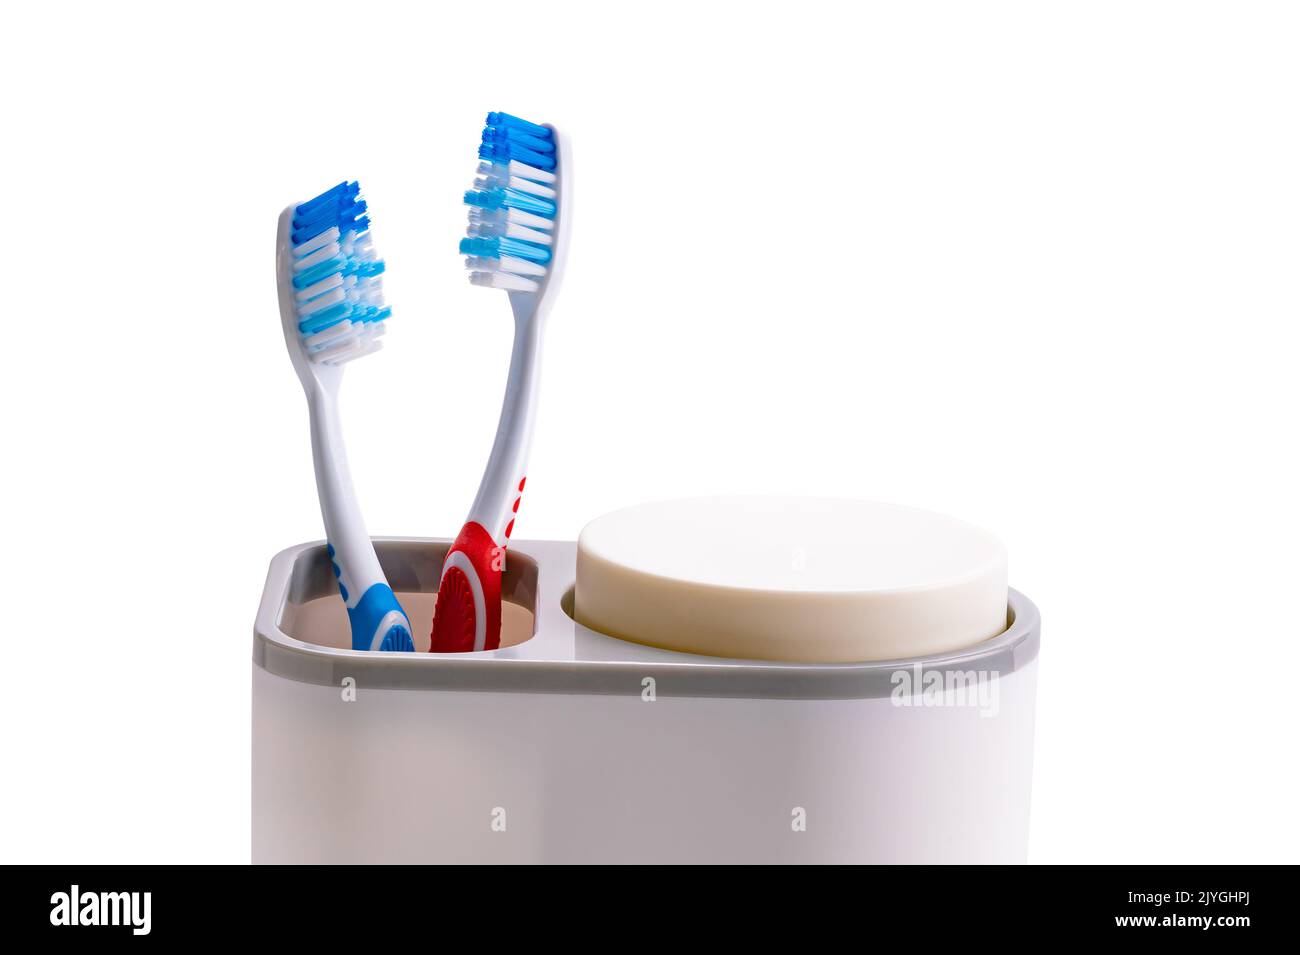 New toothbrushes red and blue handle in plastic holder isolated on white background with clipping path. Stock Photo